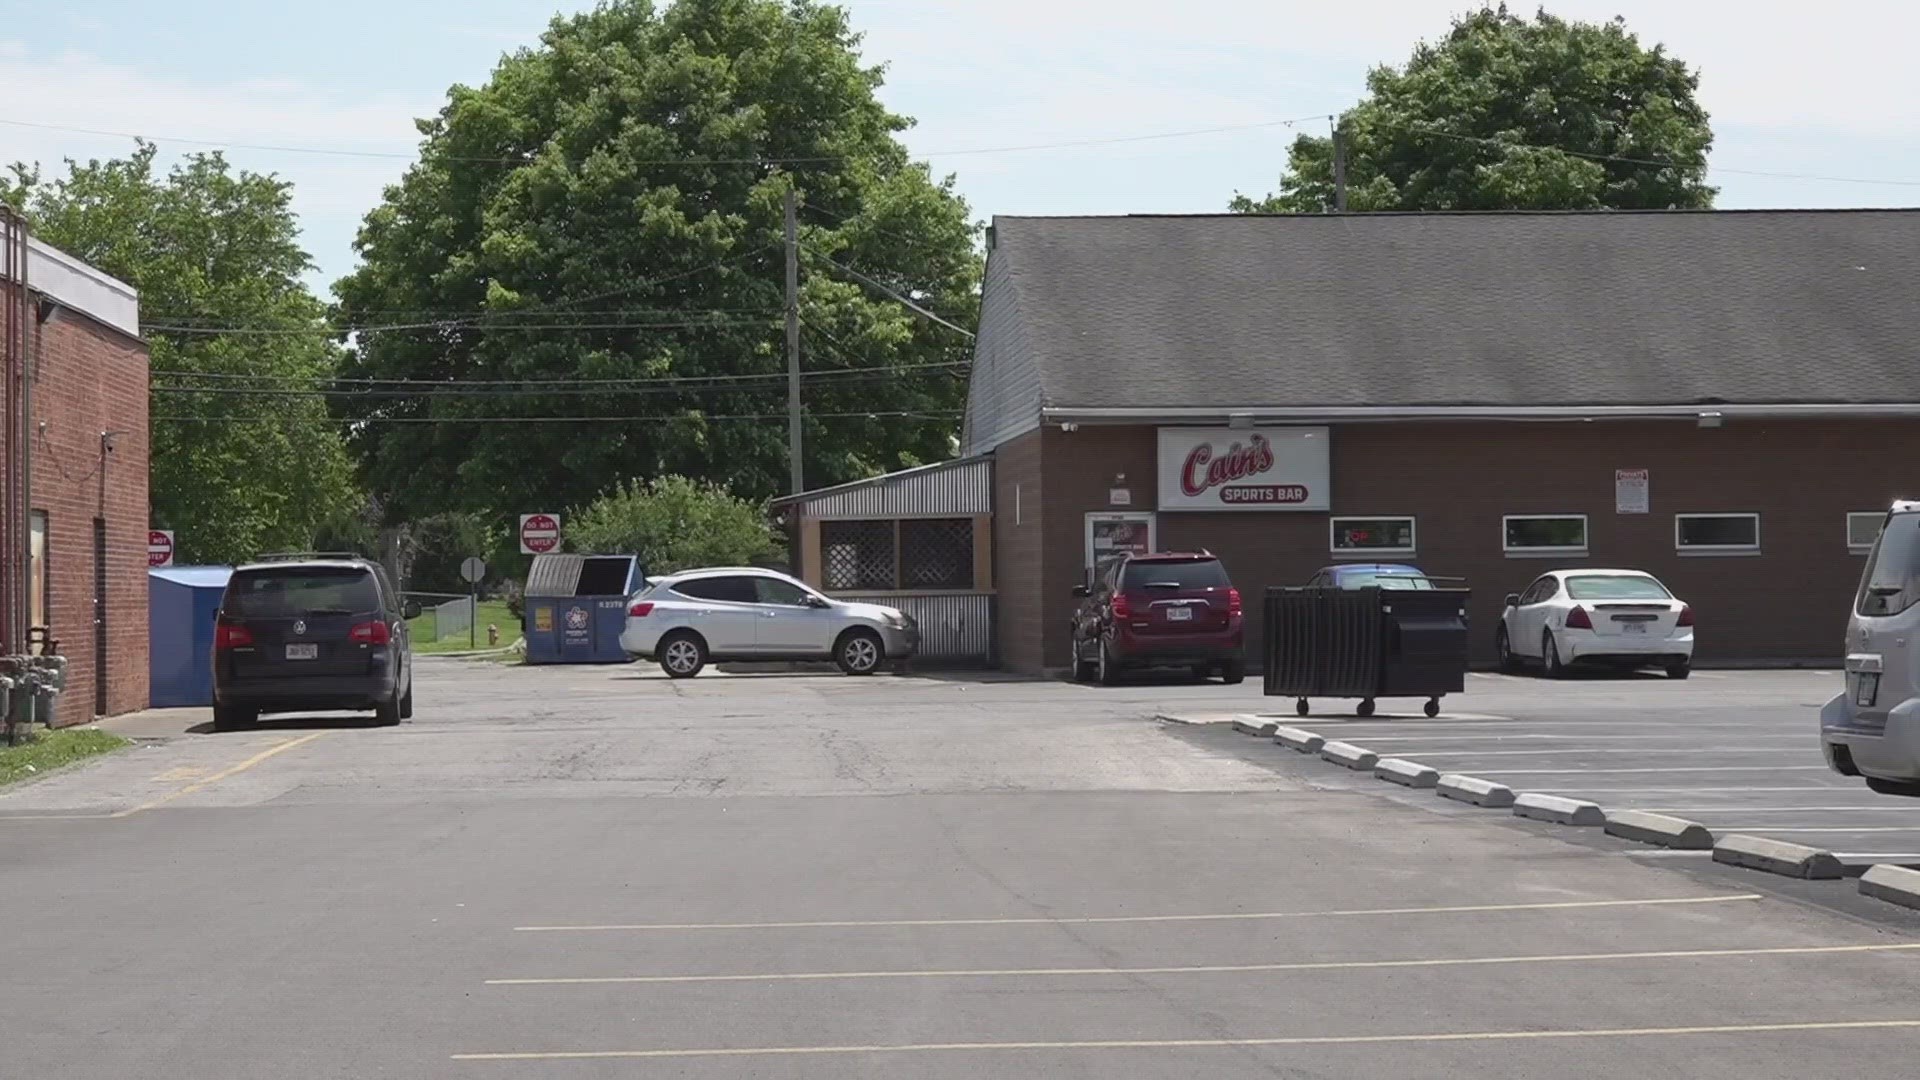 The bar was the scene of a double homicide in July where four individuals were shot.